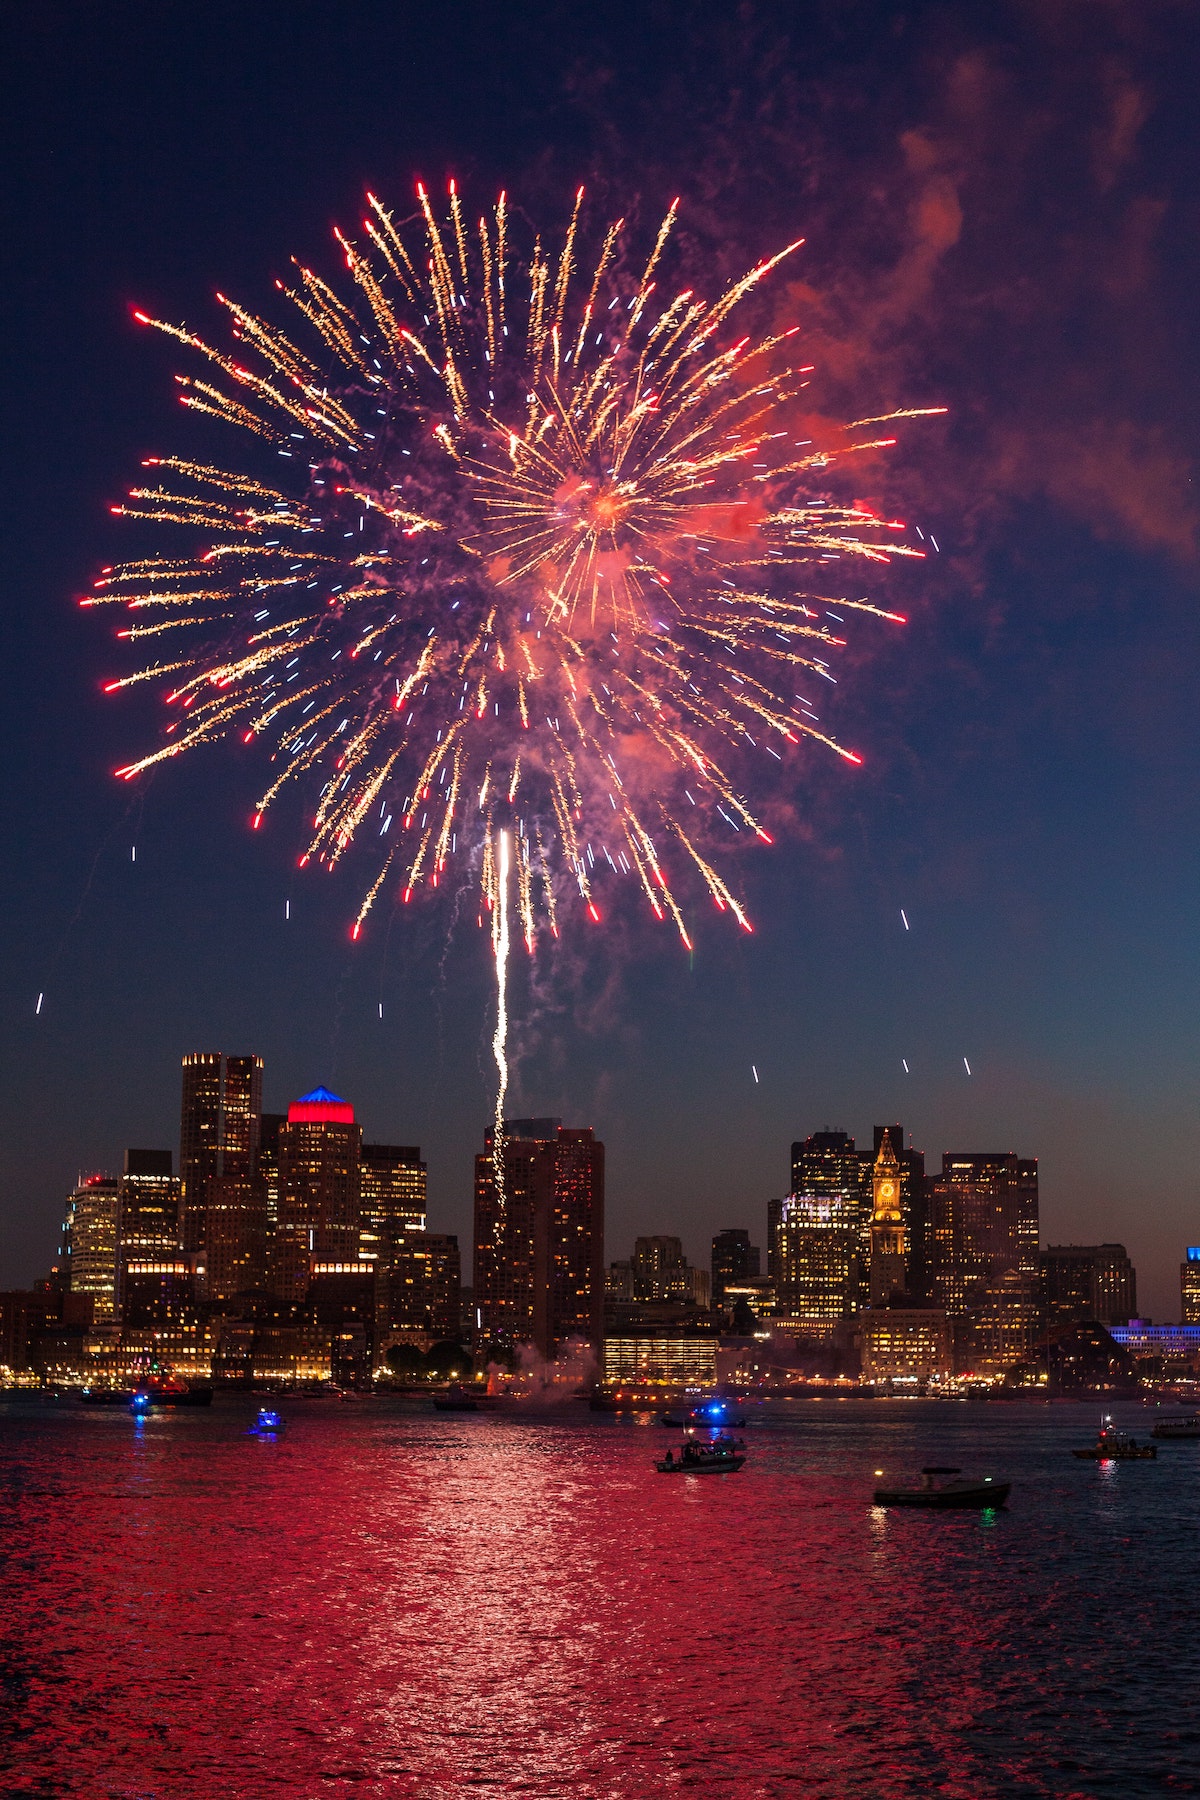 A huge red and white firework explodes over the Boston skyline on the Fourth of July, one of the most fun Festivals in Boston